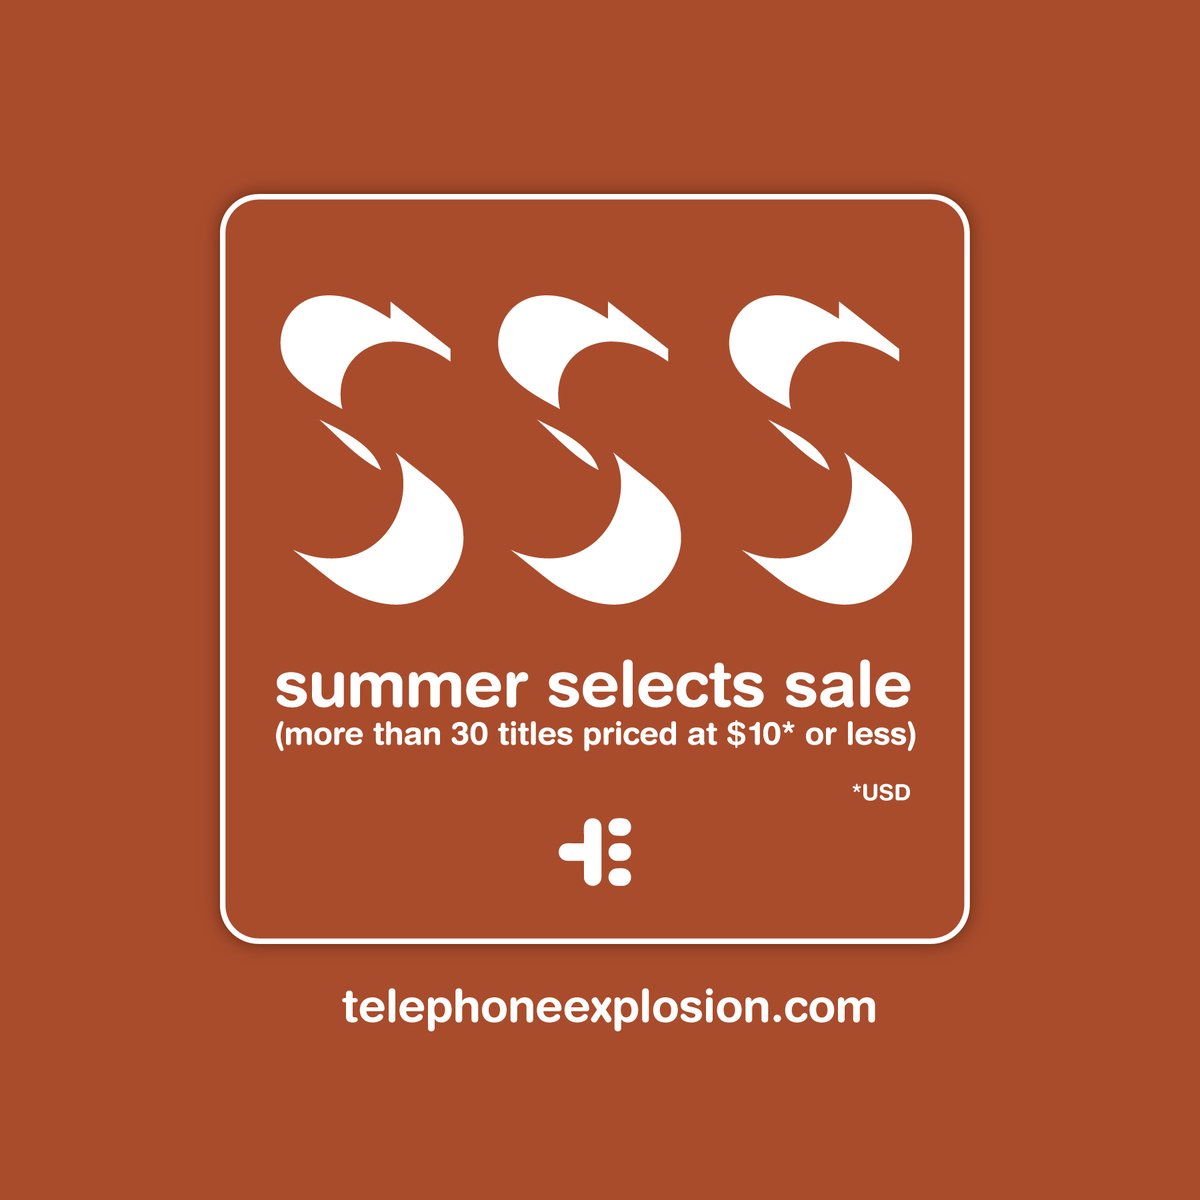 Our biggest sale yet! To celebrate summer we are offering over 30 Telephone Explosion & Morning Trip titles for $10 or less. Fill your cart and stock up for summer! telephoneexplosion.com/collections/su…